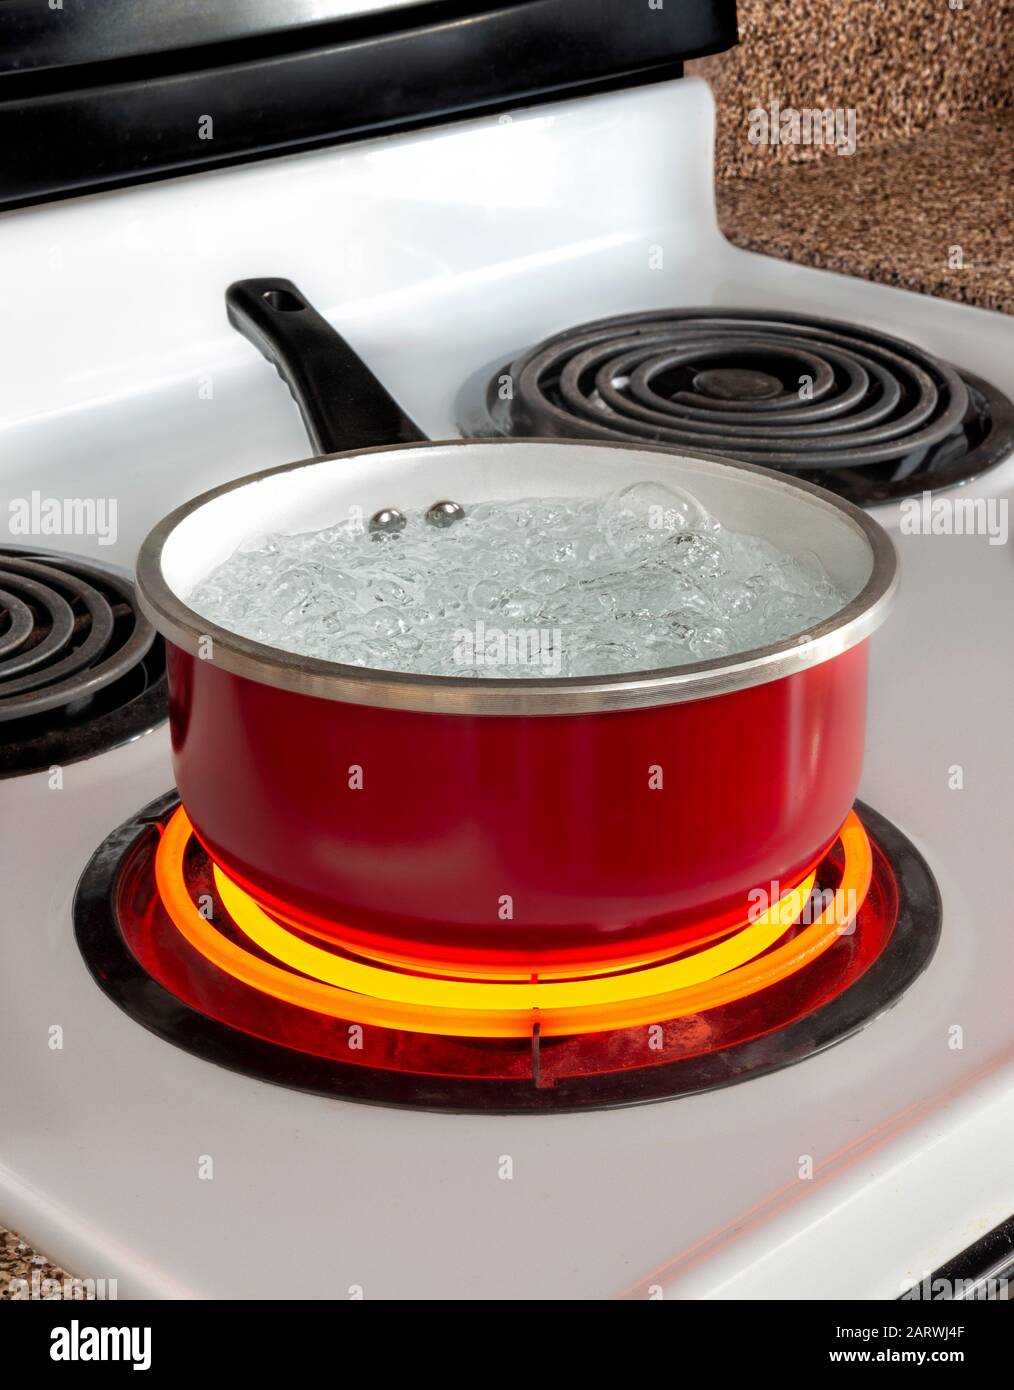 https://c8.alamy.com/comp/2ARWJ4F/vertical-shot-of-a-red-pan-of-boiling-water-on-top-of-a-stove-with-the-burner-turned-to-high-2ARWJ4F.jpg